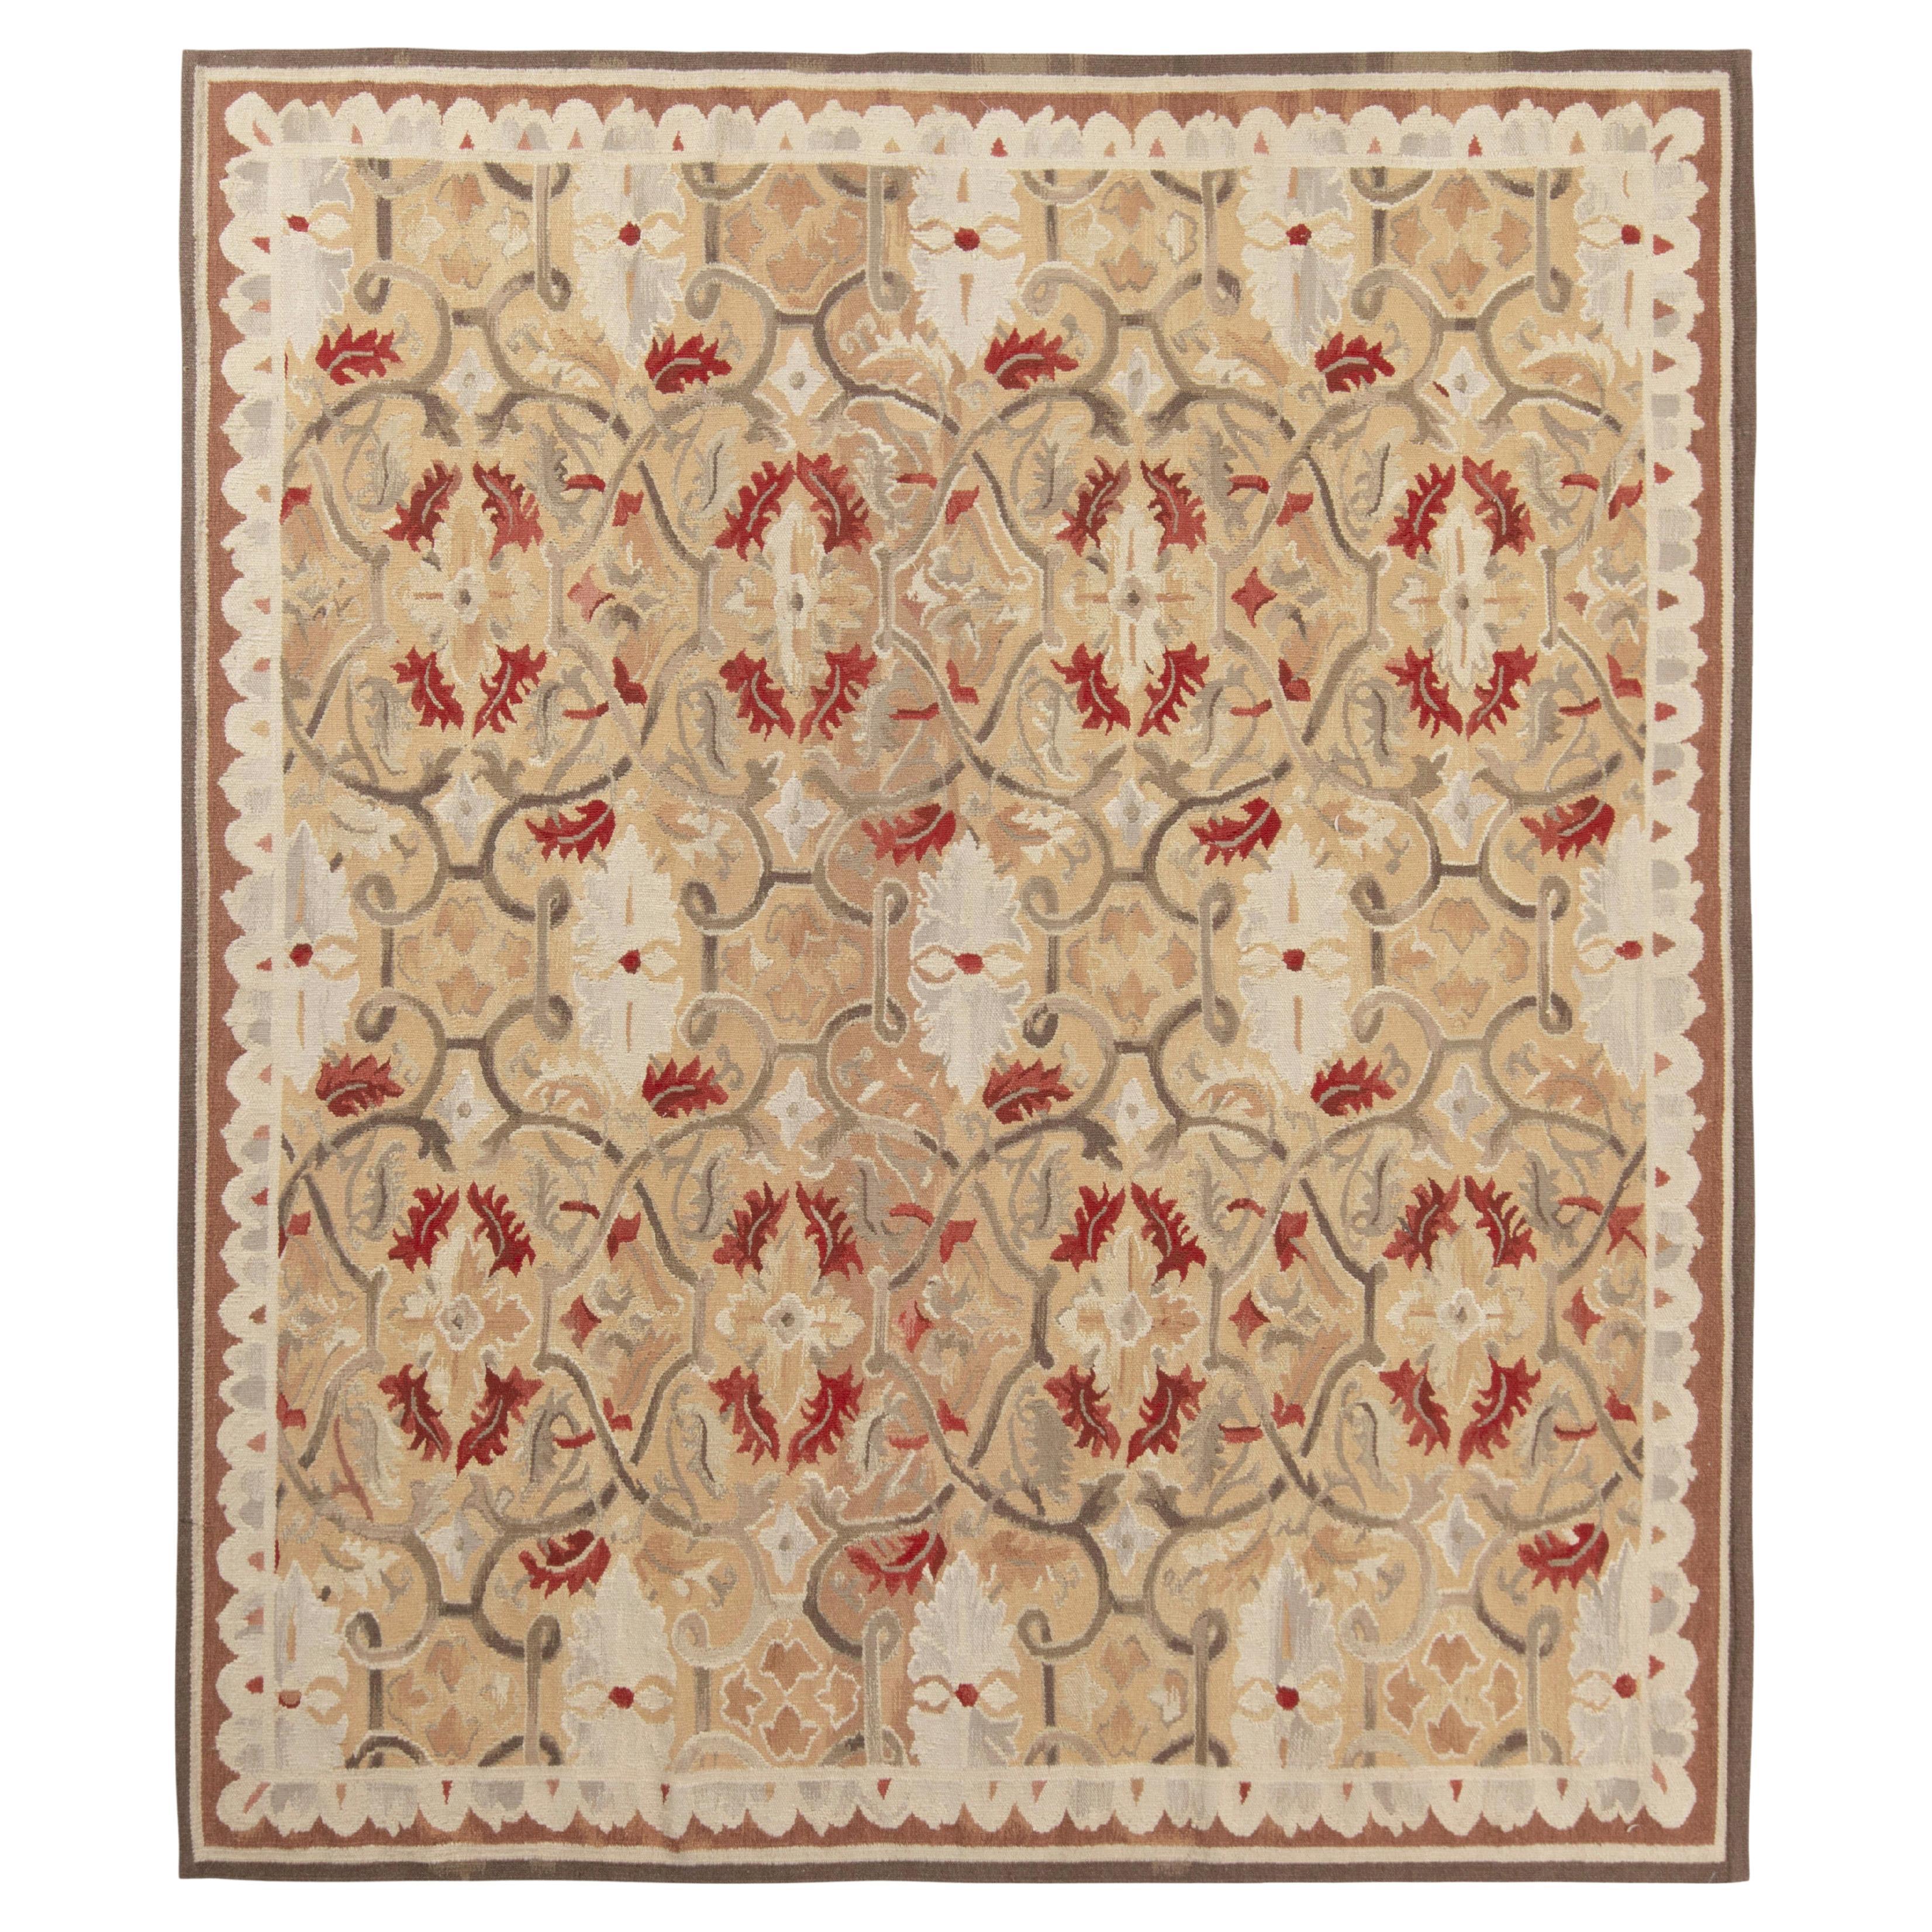 Rug & Kilim’s Aubusson Flat Weave Style Rug, Beige, Gray and Red Floral Pattern